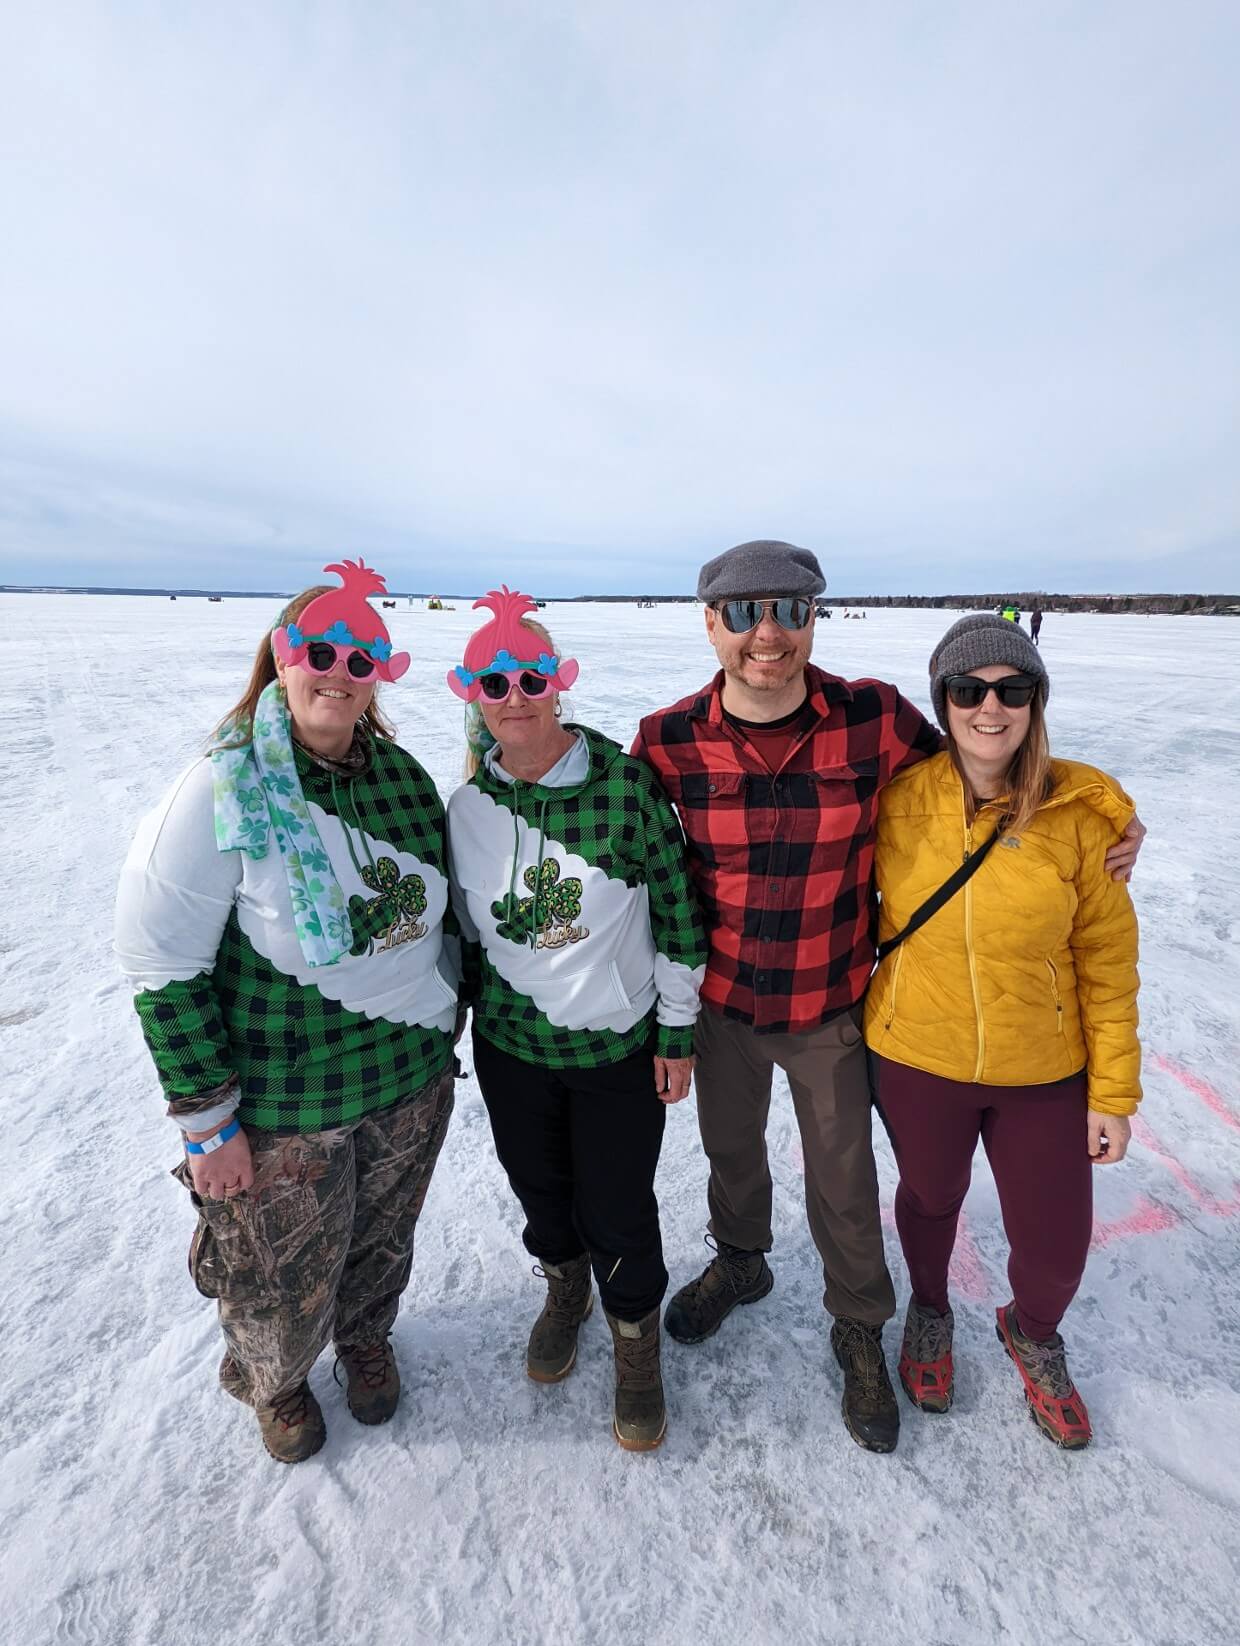 Four people standing on frozen ice looking at camera. Two are wearing matching green checked outfits and themed glasses